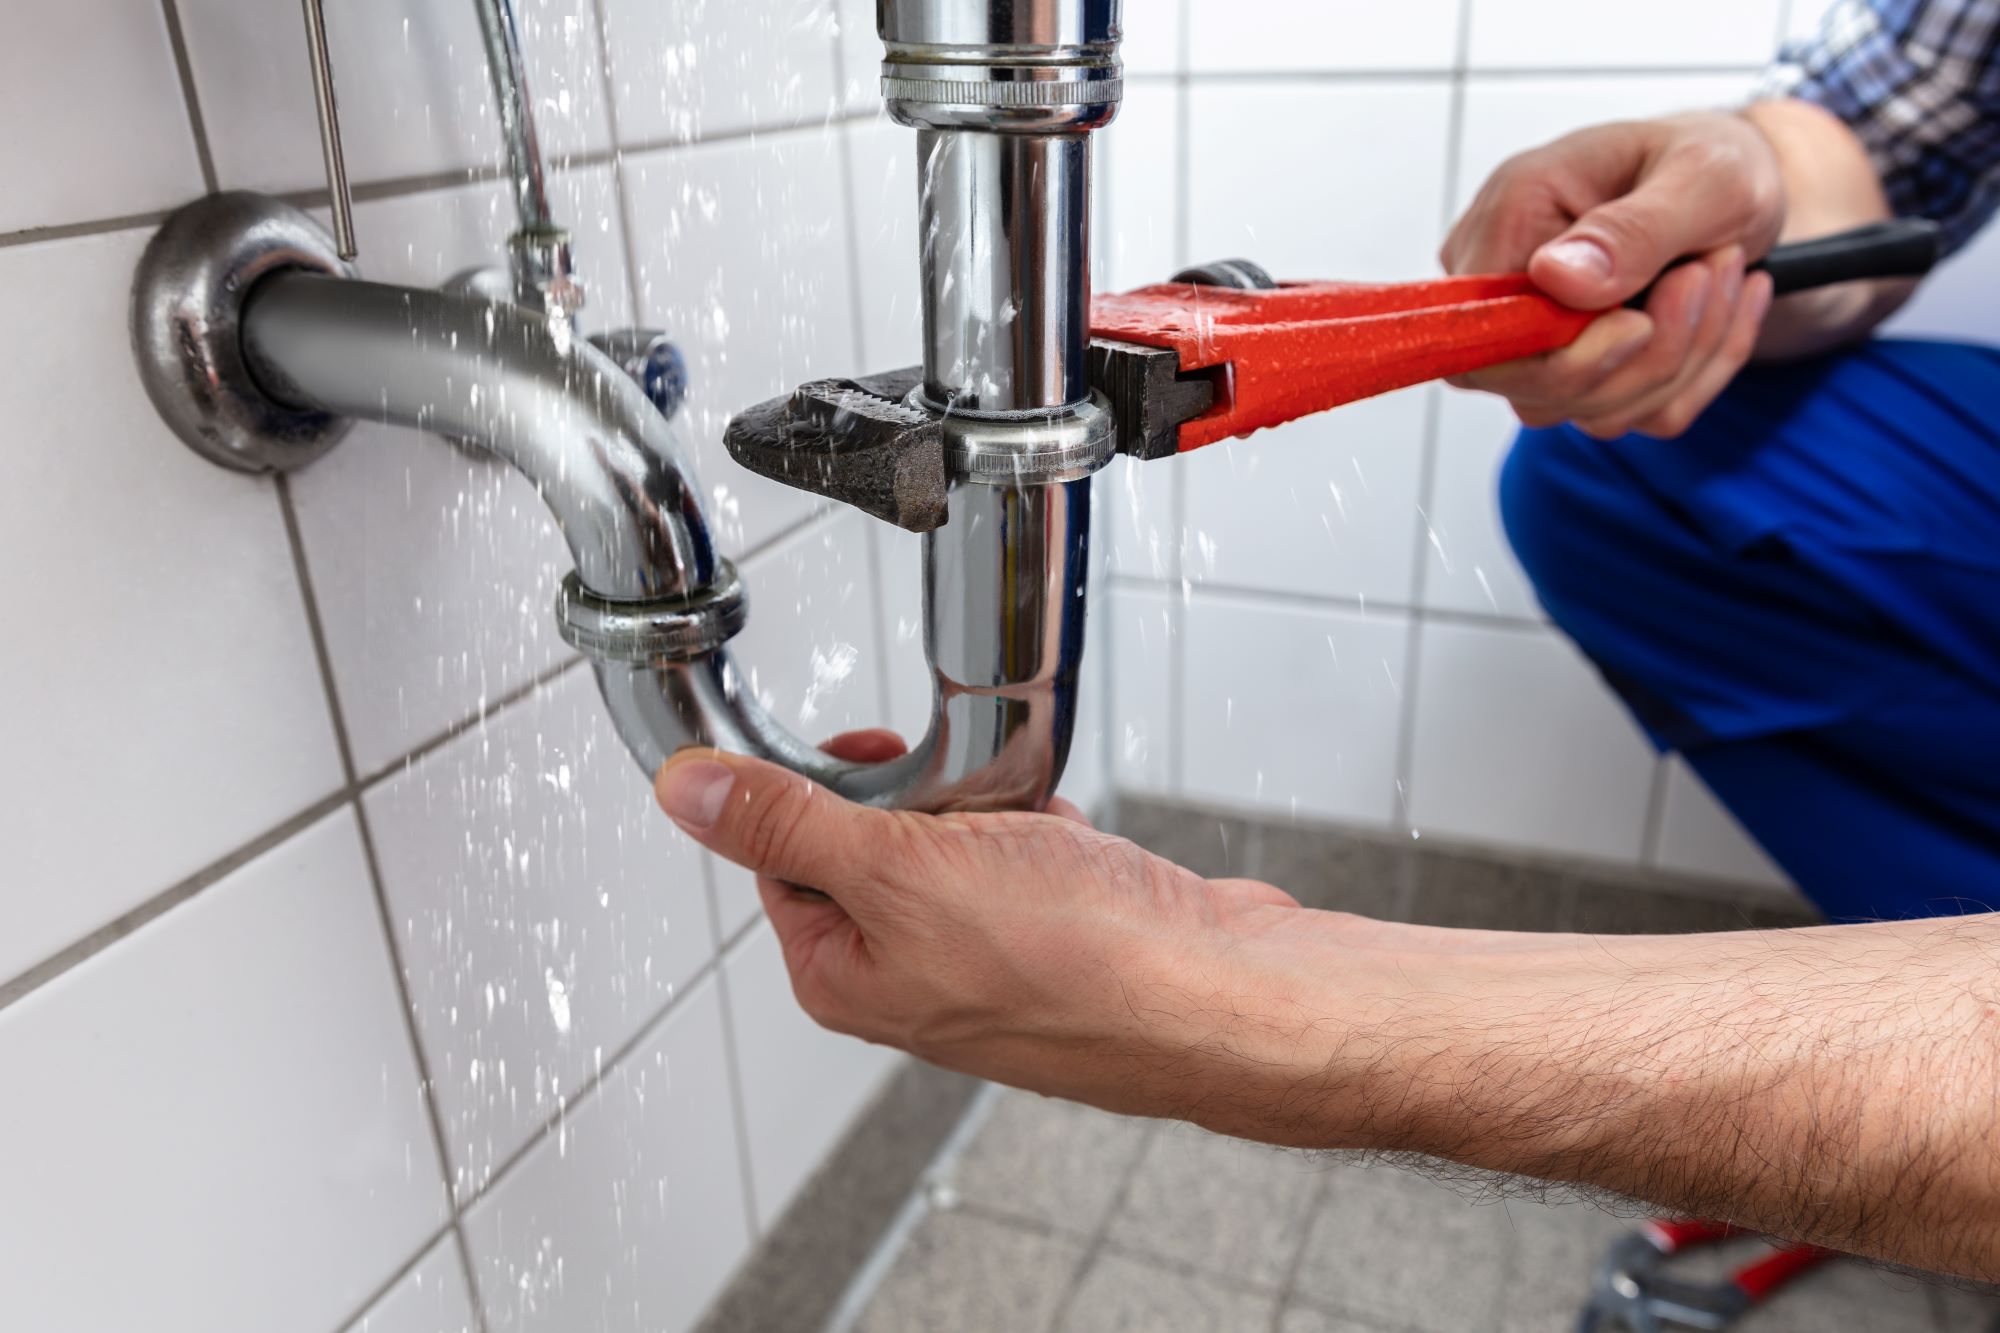 Plumbing 101: Basic Tips Every Homeowner Should Know